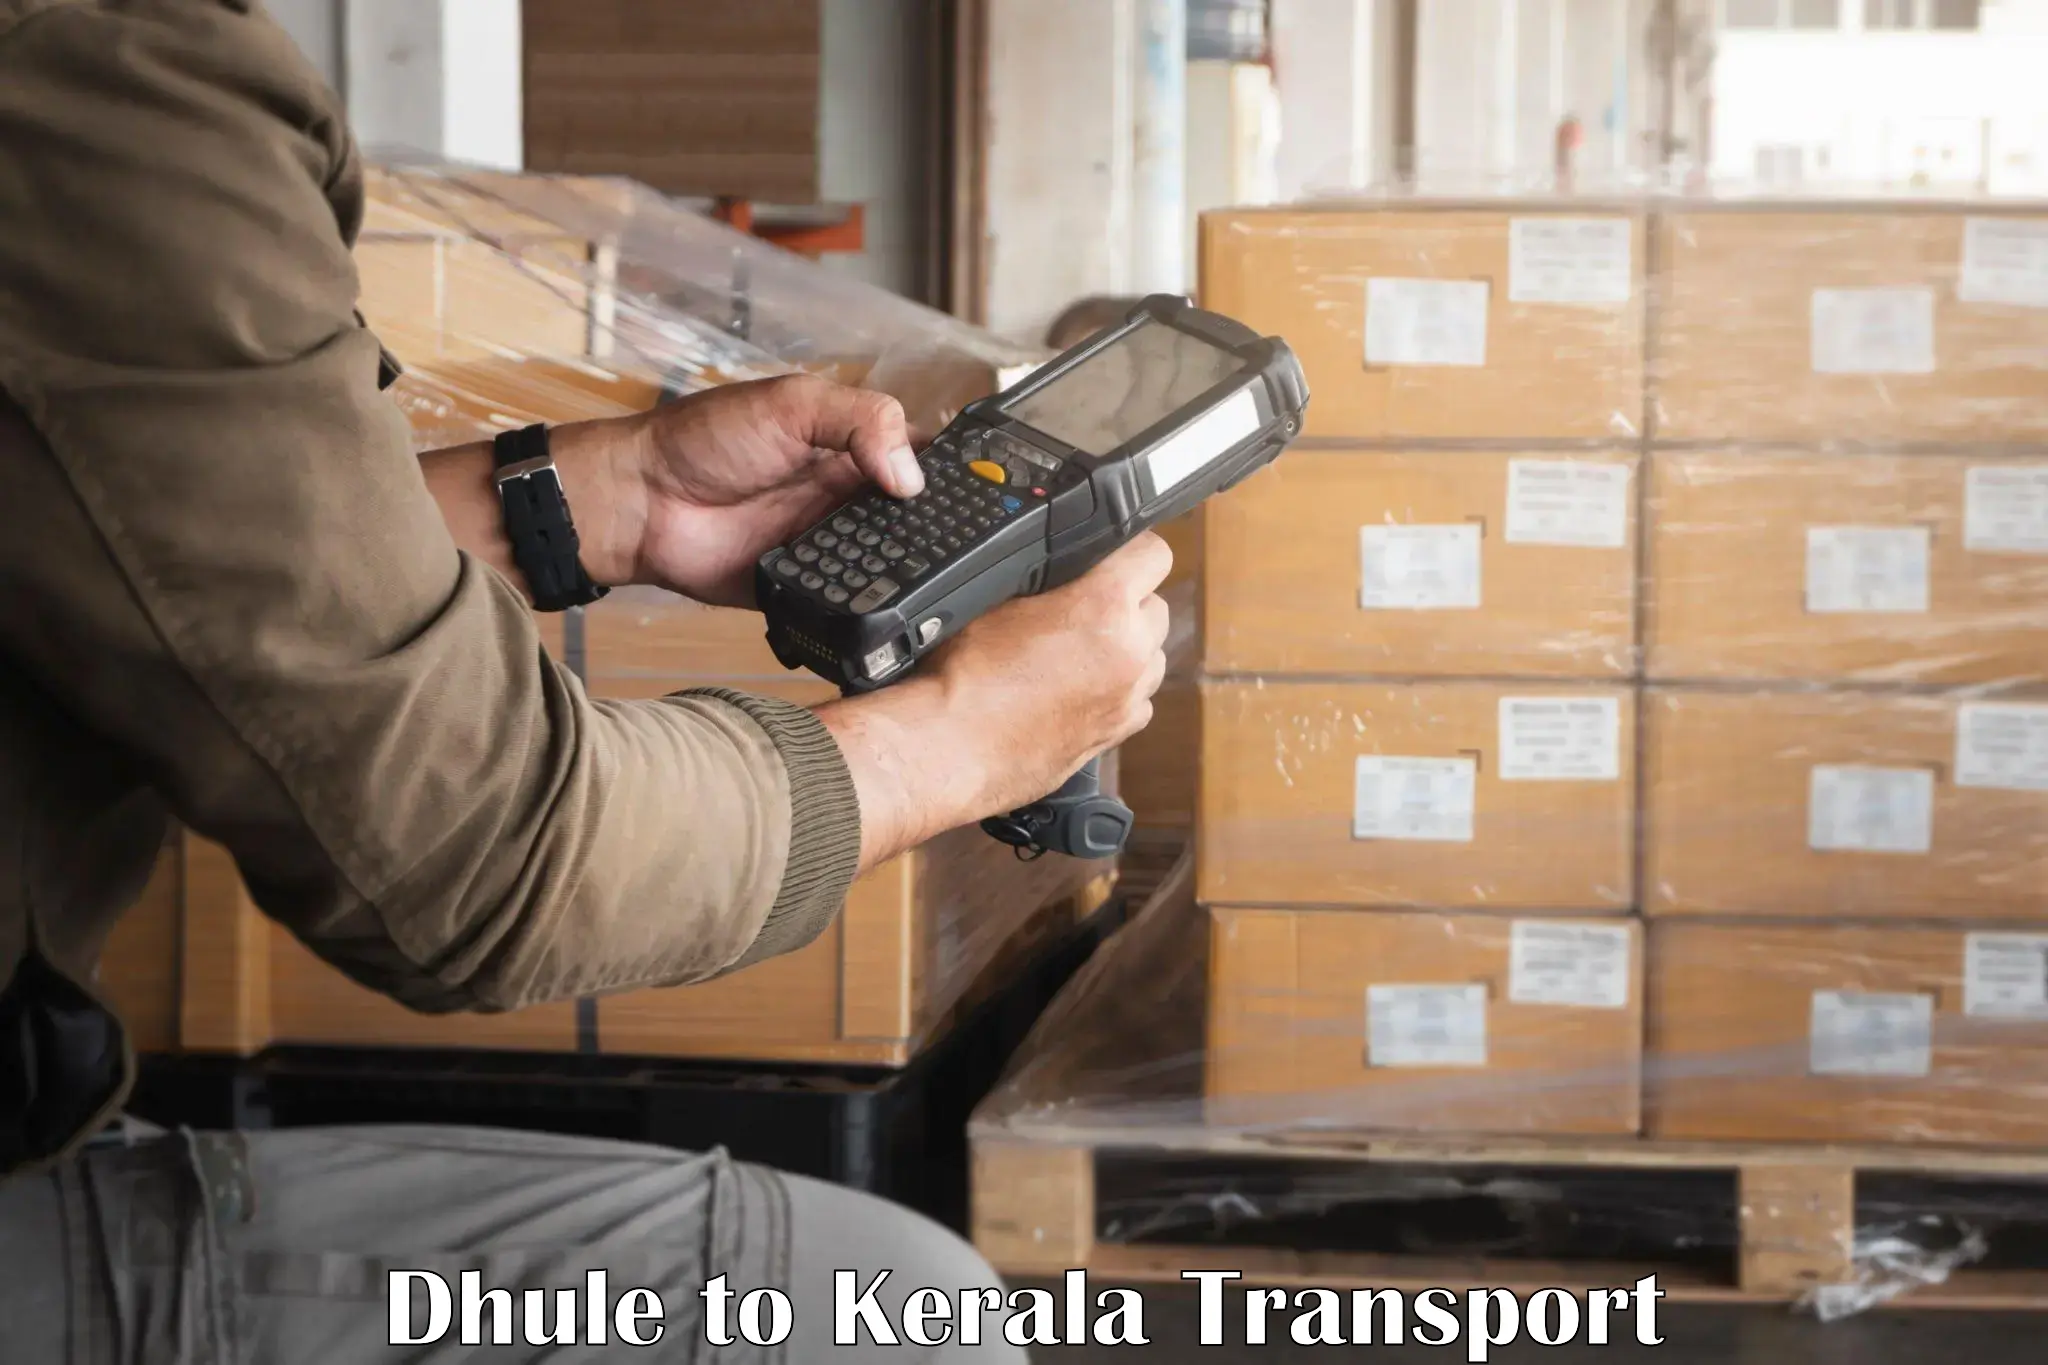 Express transport services Dhule to Nedumangad